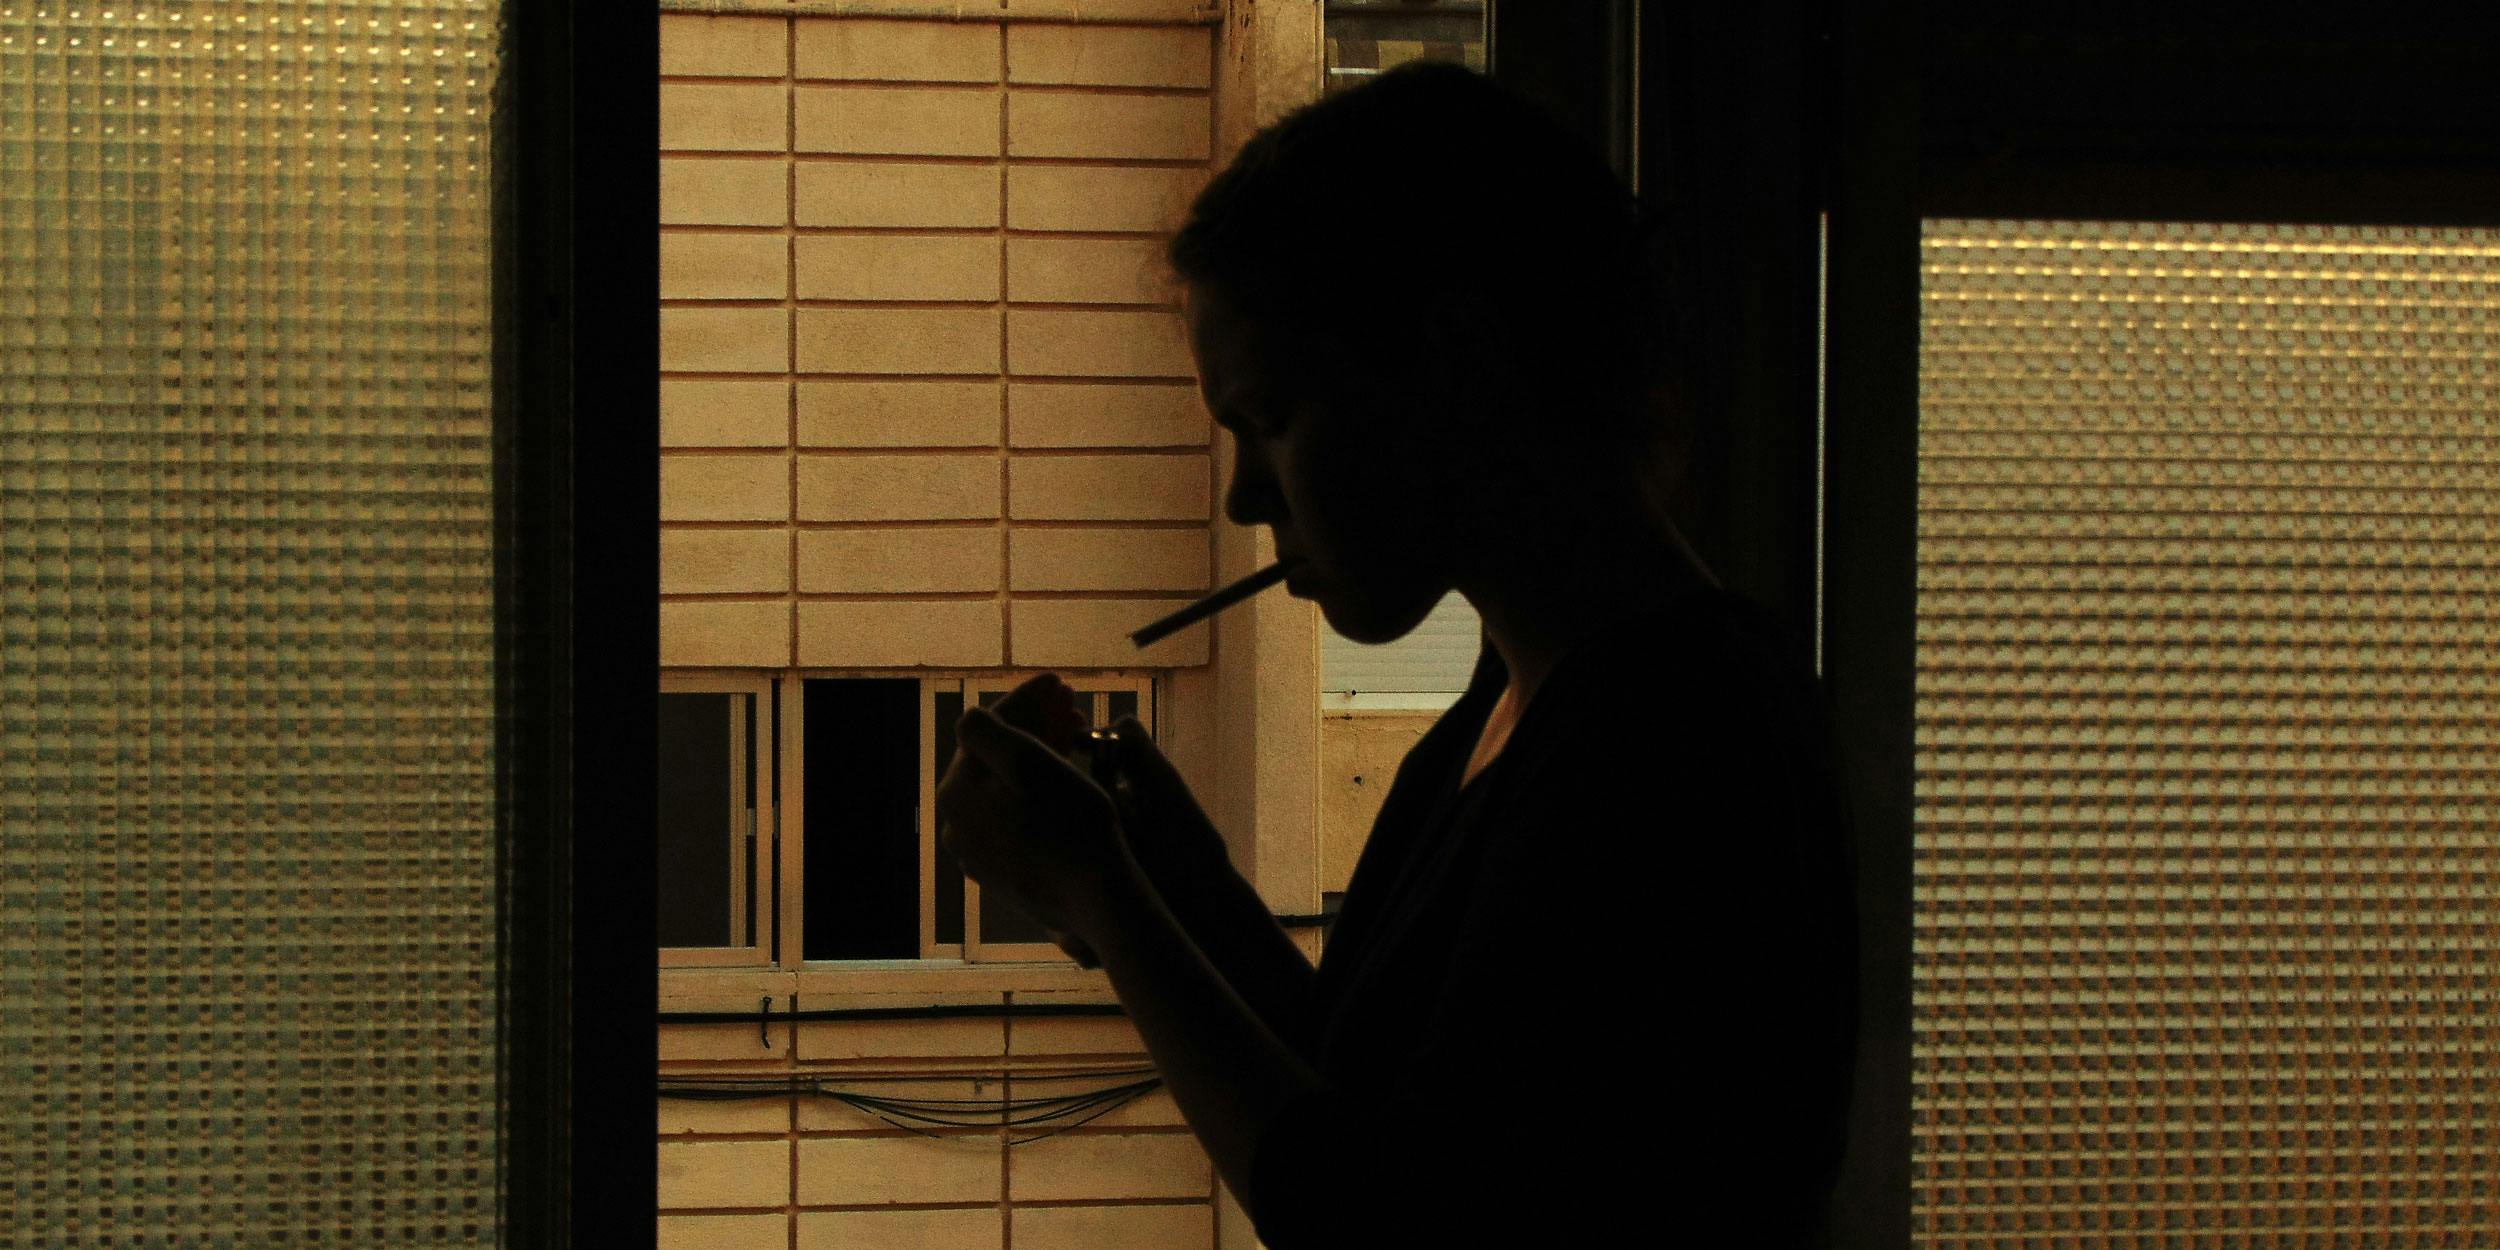 Woman sues sodexo for firing her for recreational cannabis use. Here, a woman is seen smoking at night